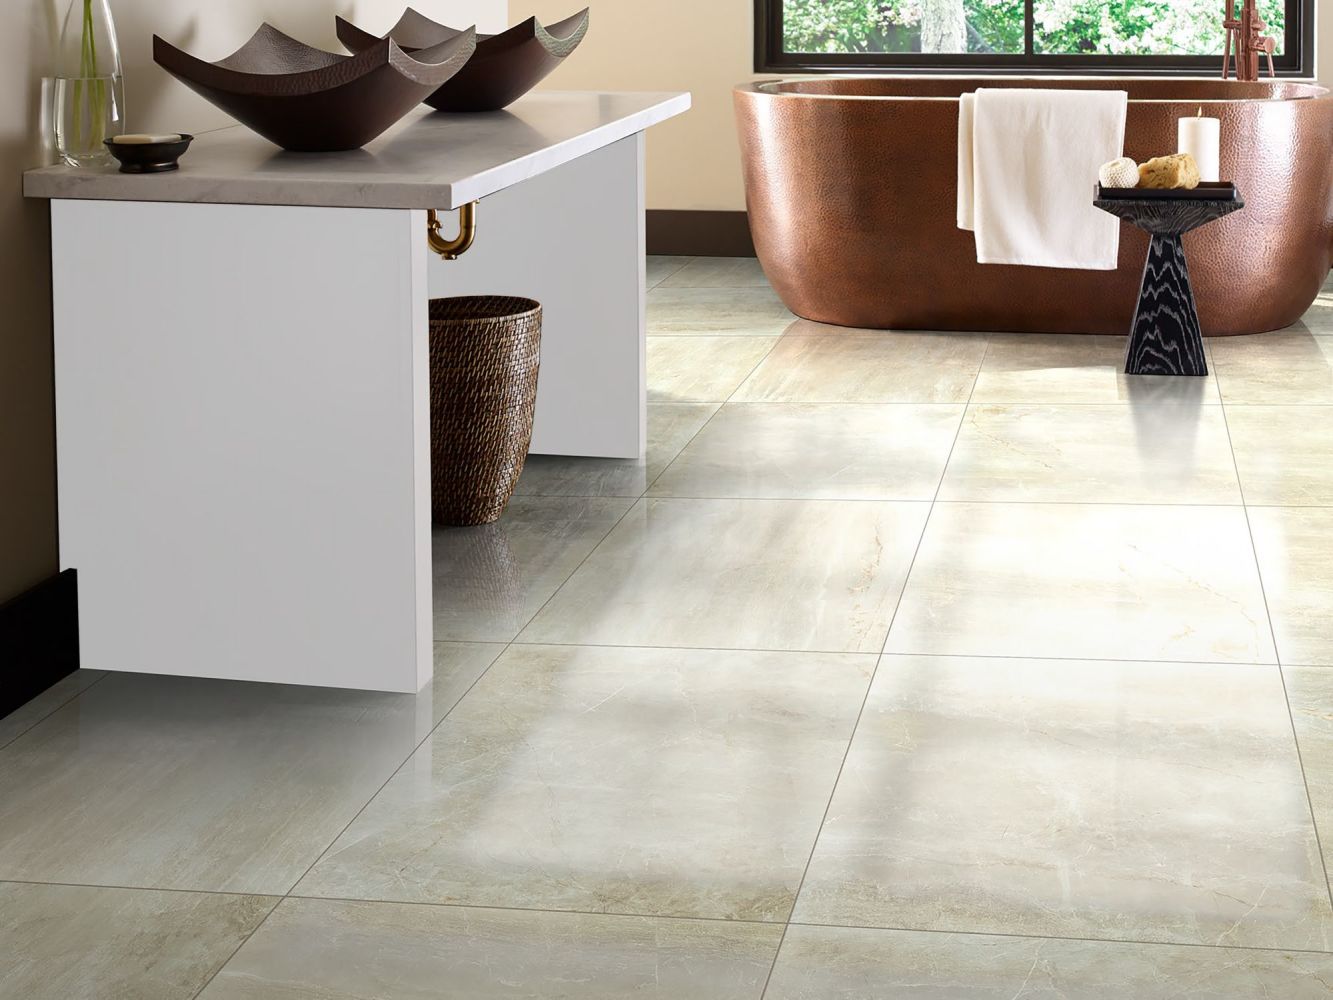 Shaw Floors Ceramic Solutions Trace 24×24 Matte Creme 00200_320TS